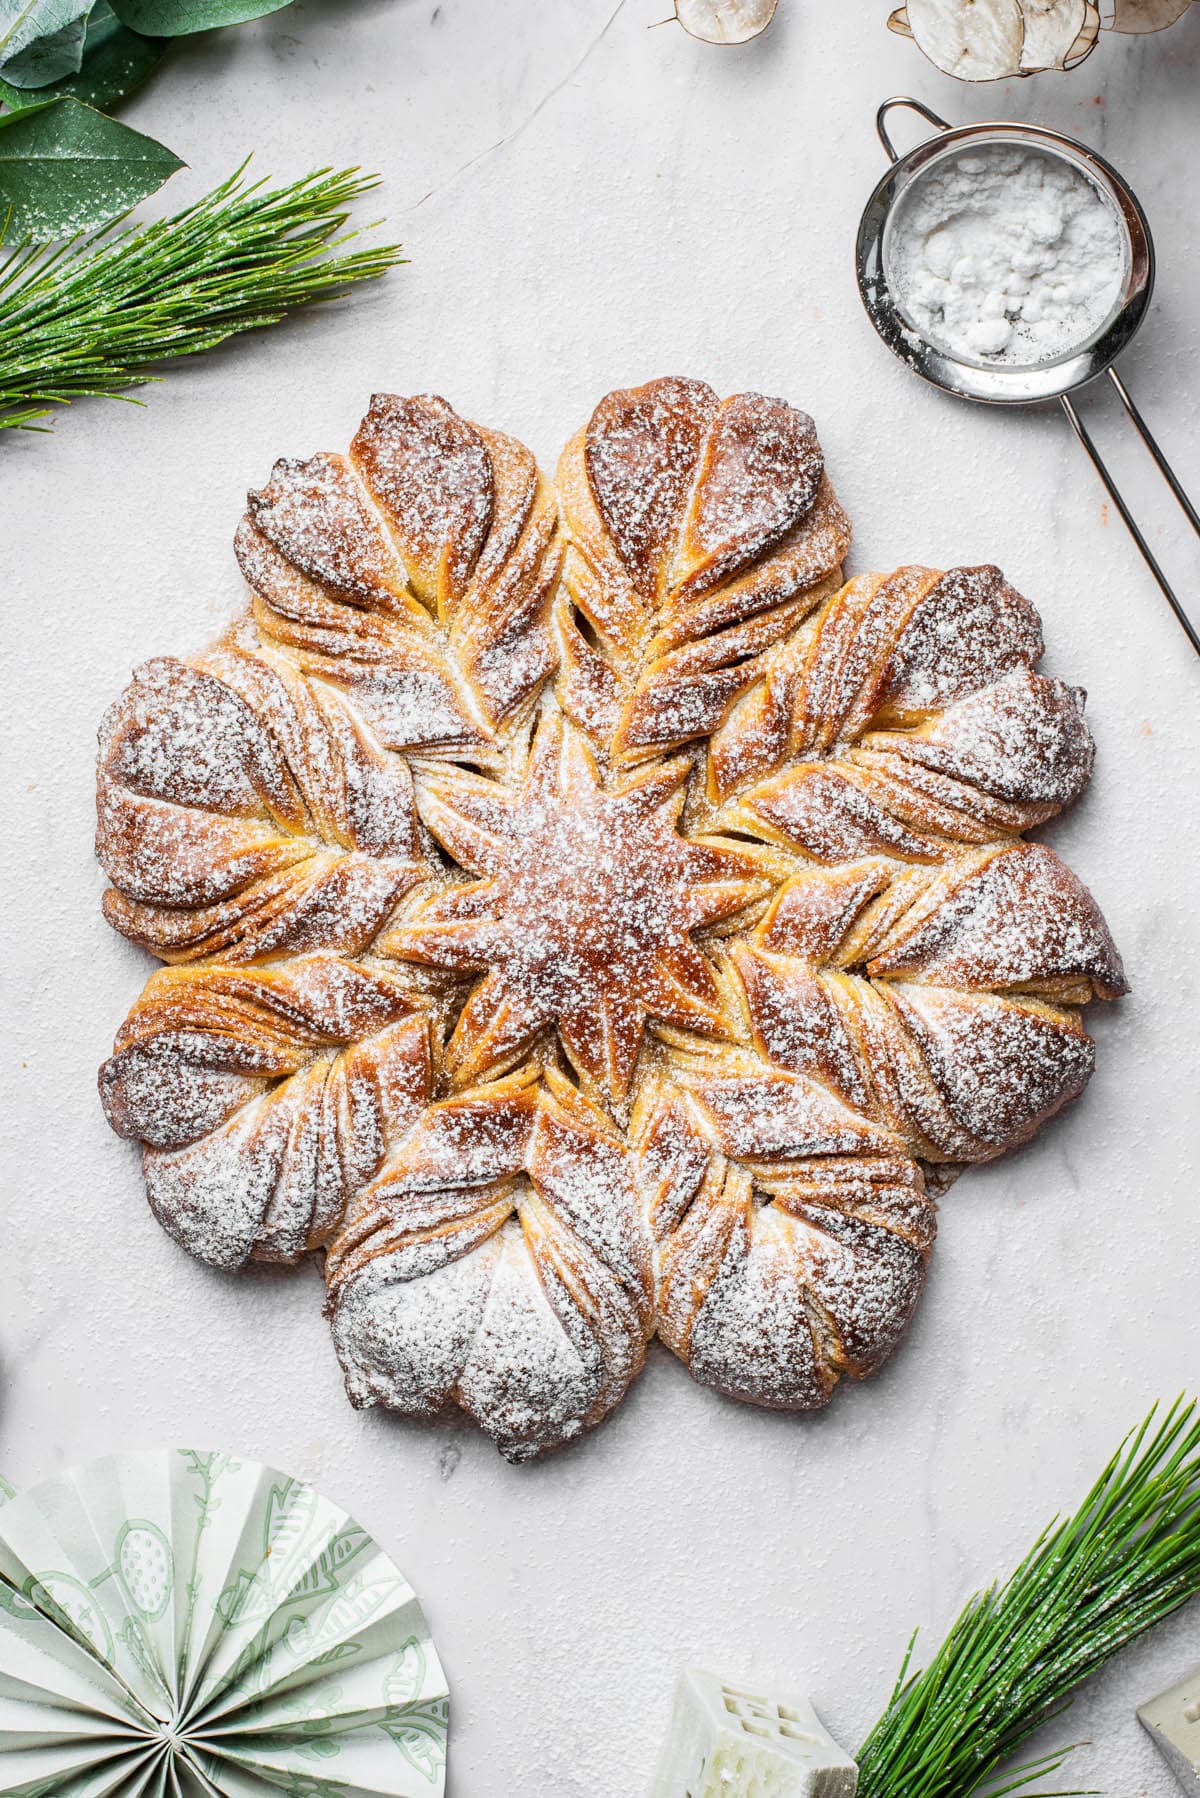 Top-down view of a loaf of star bread or snowflake bread topped with icing sugar.